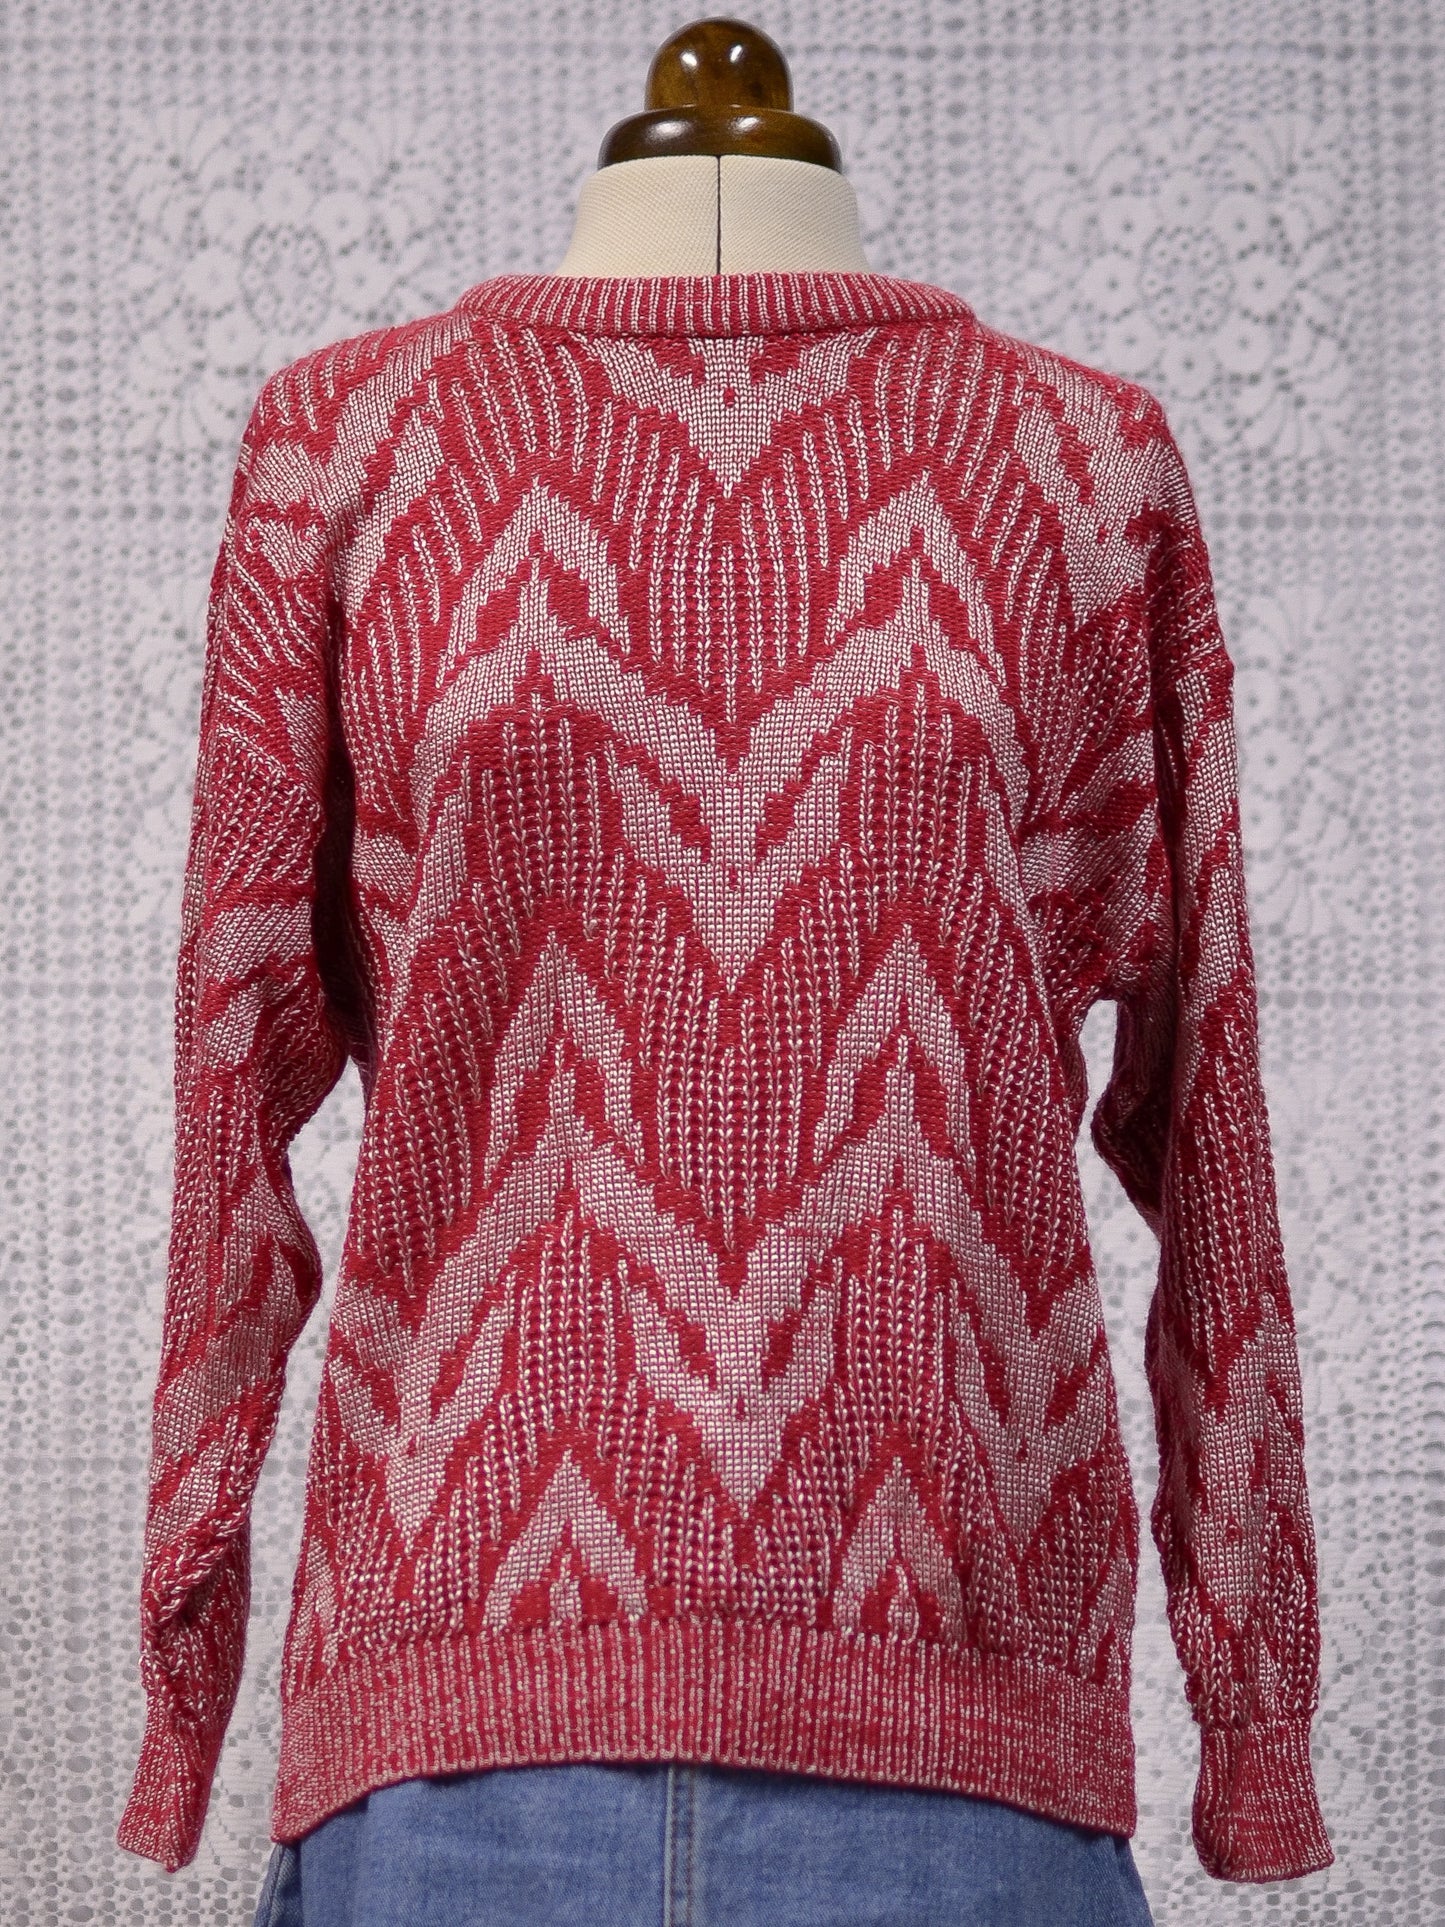 1980s C&A red and silver patterned jumper